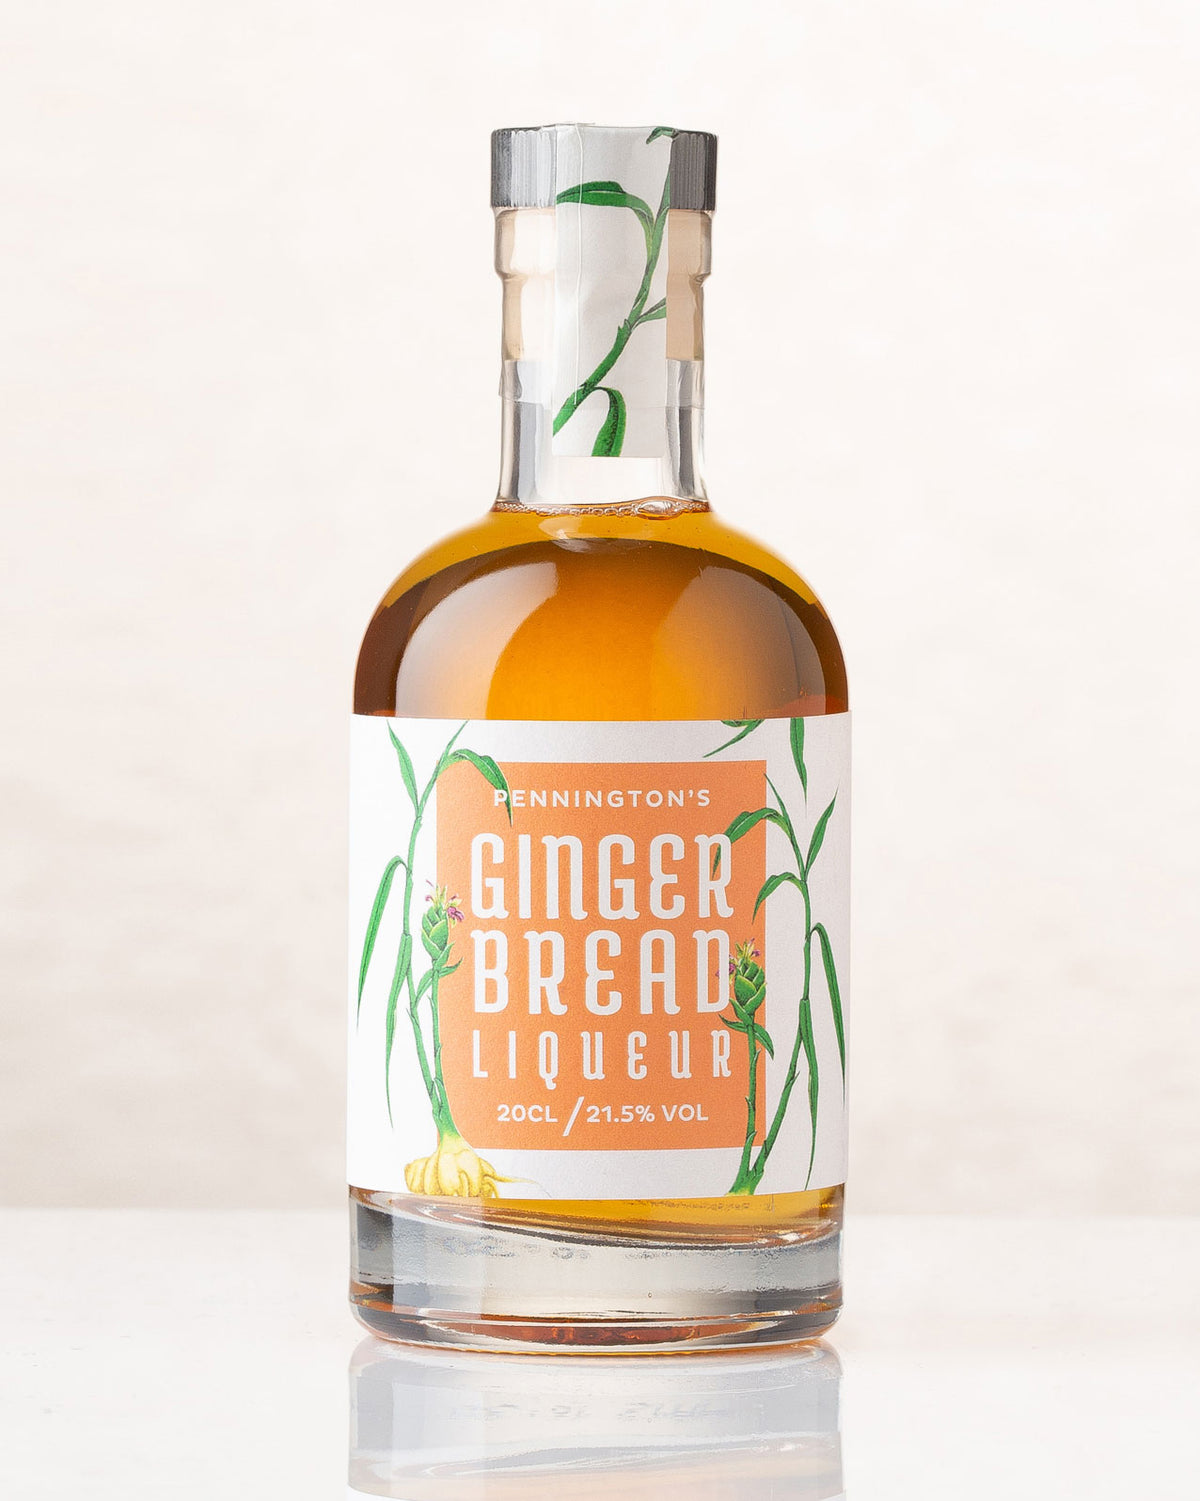 Gingerbread Liqueur - Northumbrian Gifts